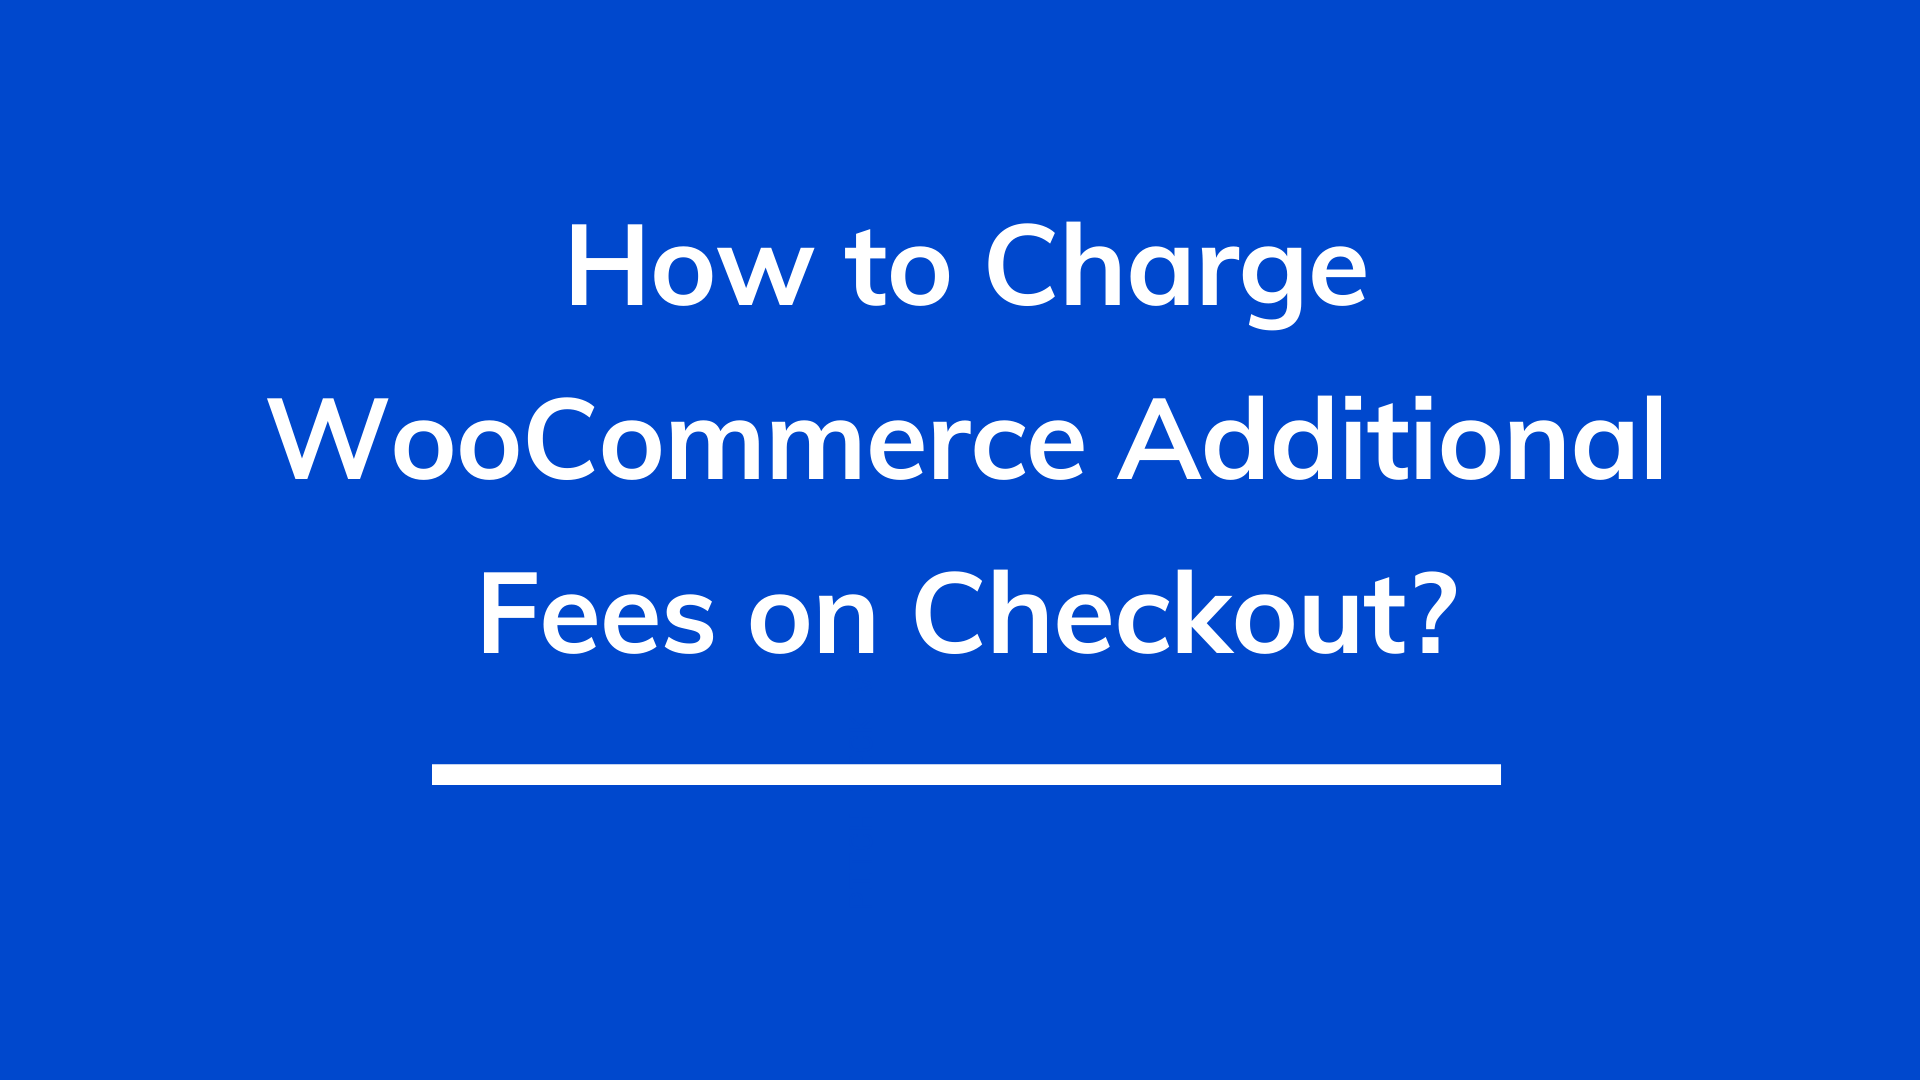 How to charge WooCommerce additional fees on checkout?